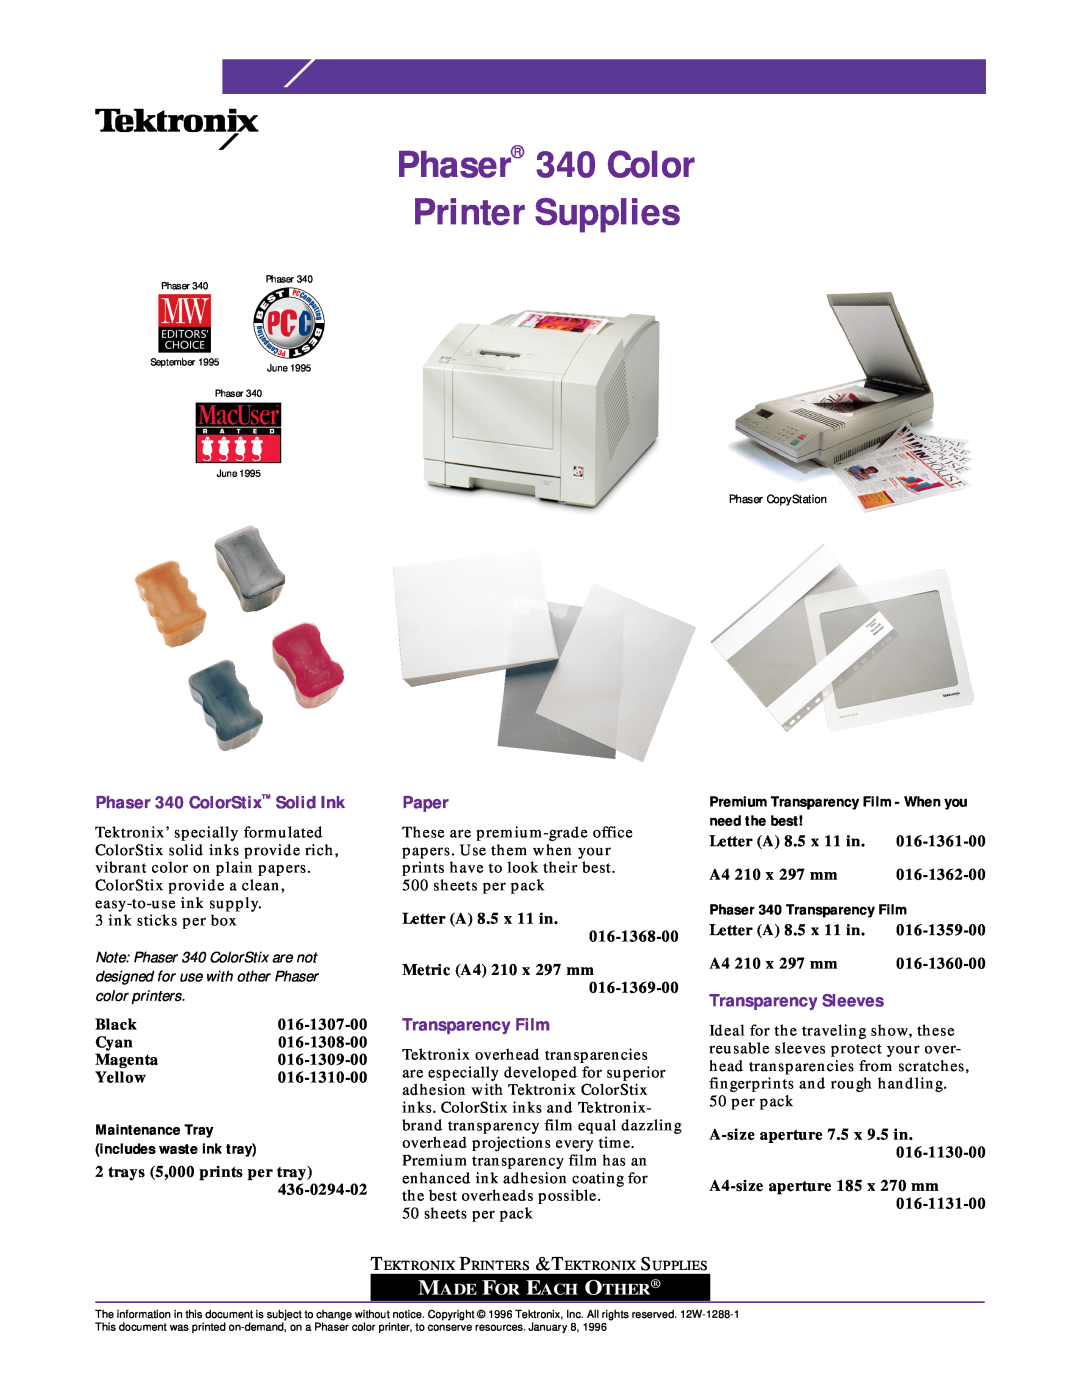 Tektronix 016-1307-00, 016-1310-00 manual Phaser 340 ColorStix Solid Ink, Paper, Transparency Film, Transparency Sleeves 